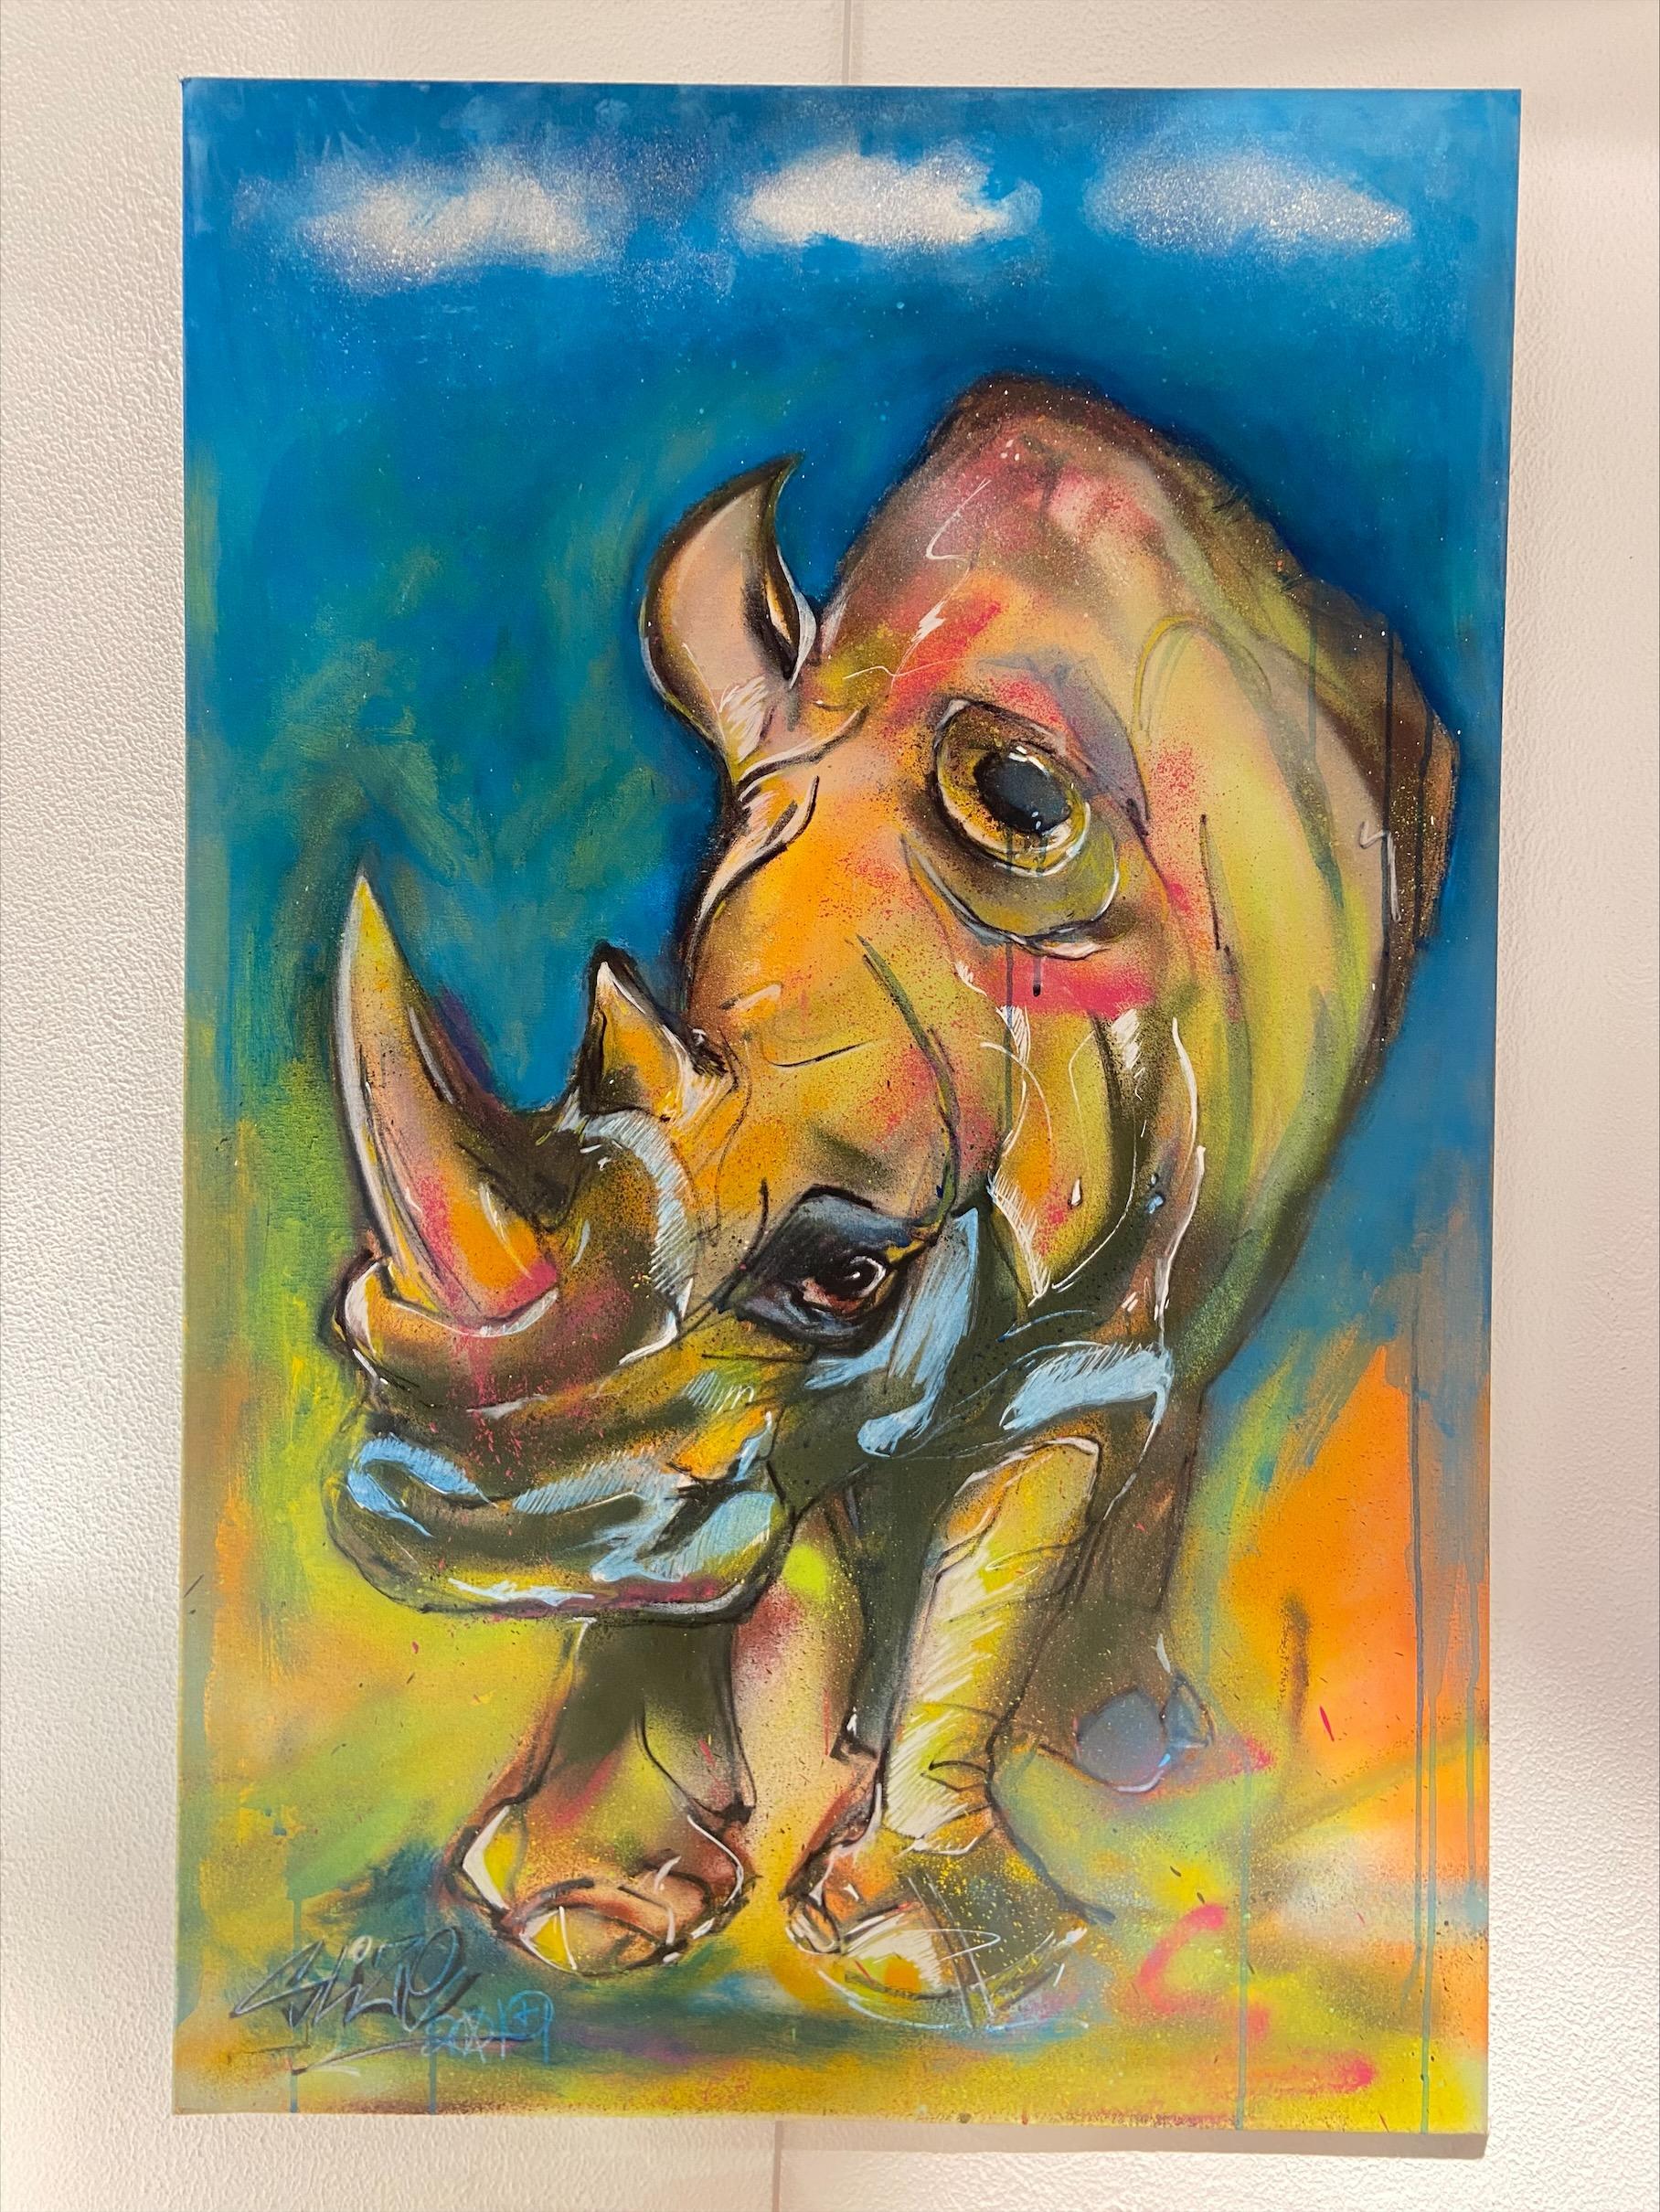 Rhinoceros street Style - Dr. Slice 
Mixed media Spray on canvas + Airbrush
75x115
2019
Signed and dated 
Slimene Khebour' from his name 'Slice' is an unconditional geek interested in both the recycling of materials and renewable energy.